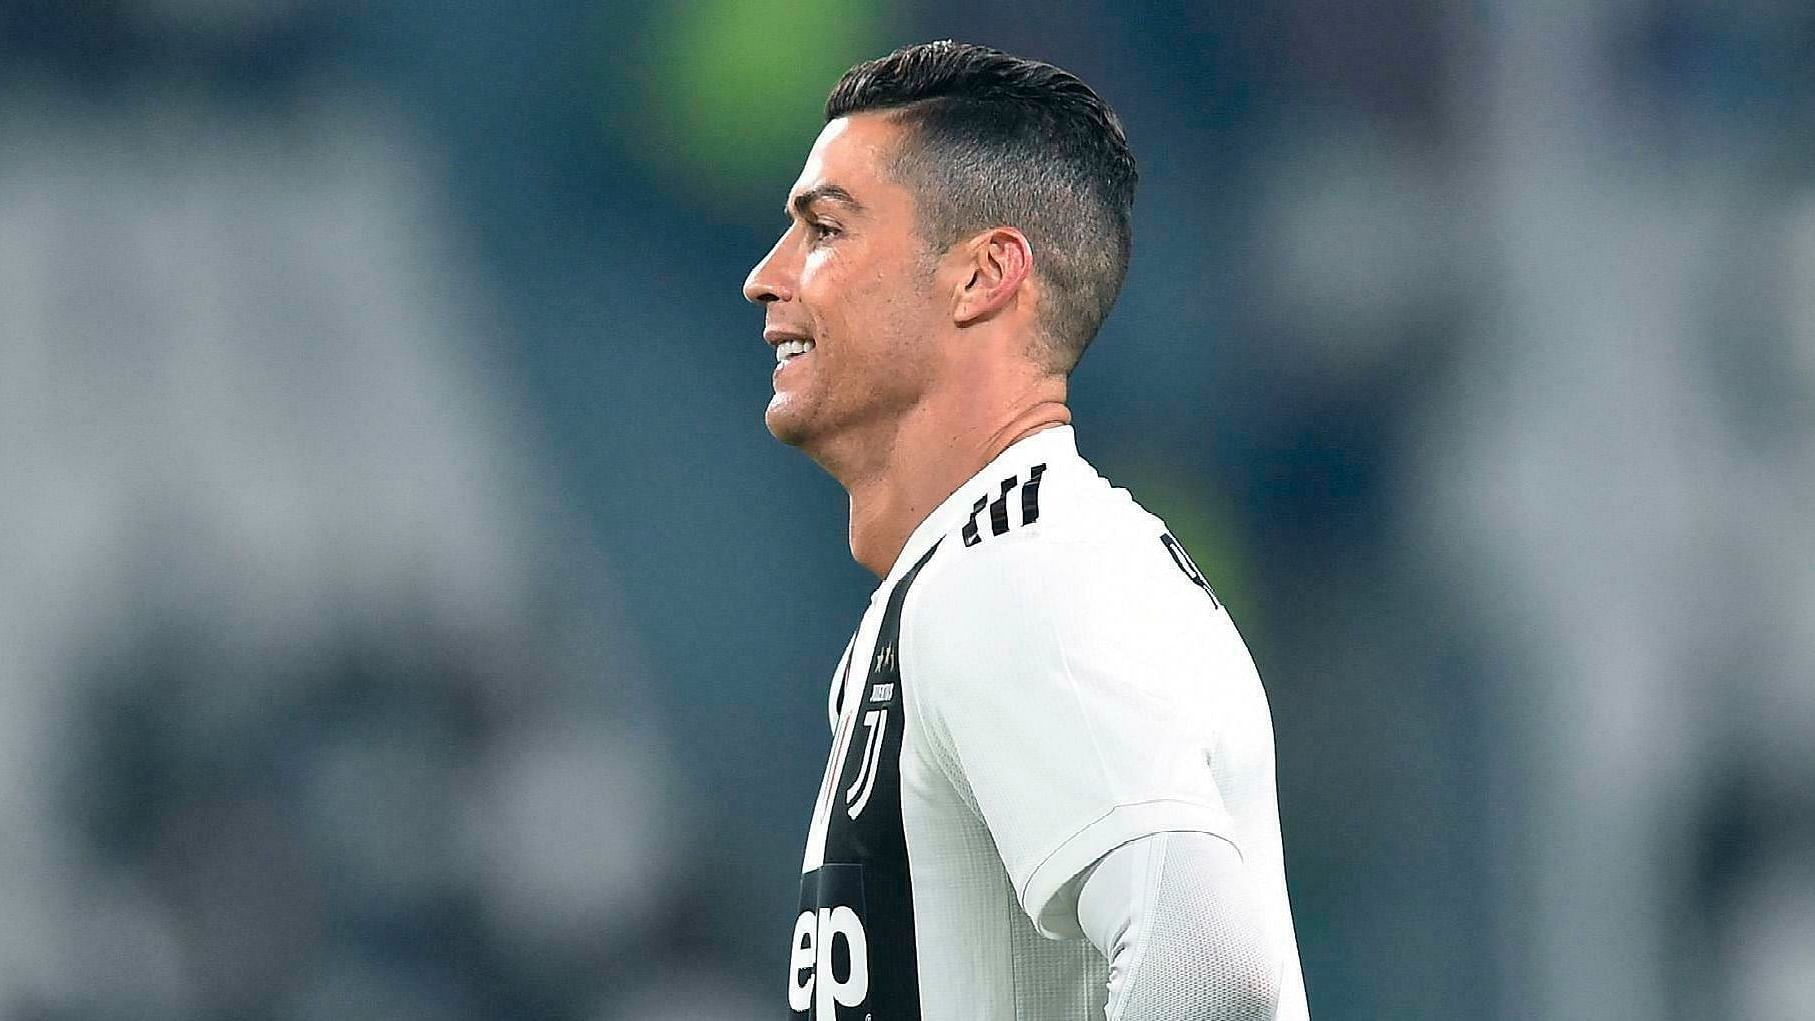 Ronaldo made the deal to plead guilty with Spain’s state prosecutor and tax authorities last year.